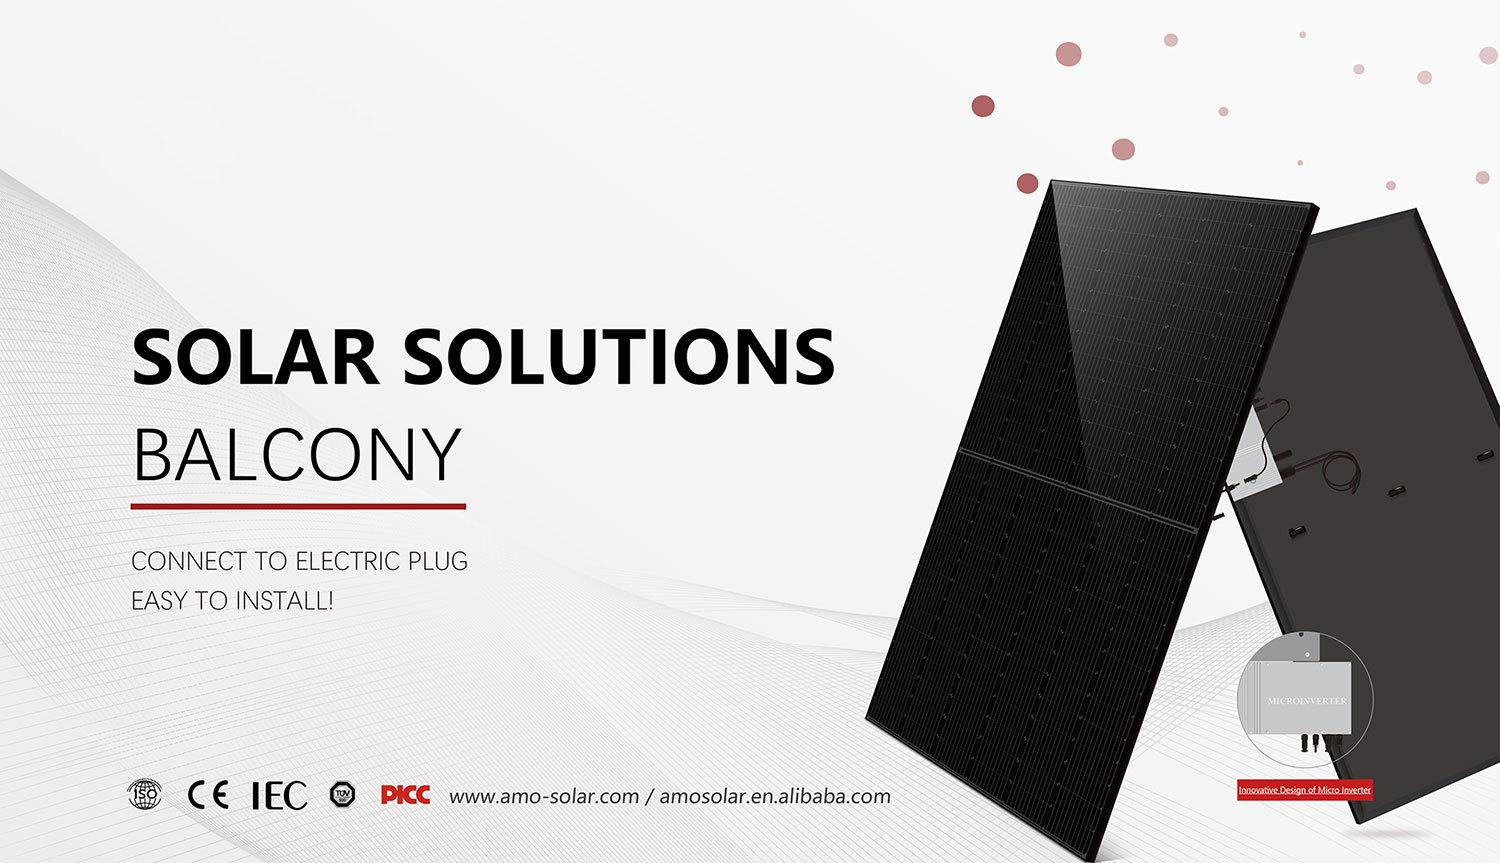 Qiqiangsolar Balcony Solar System Solution is hot-selling now!